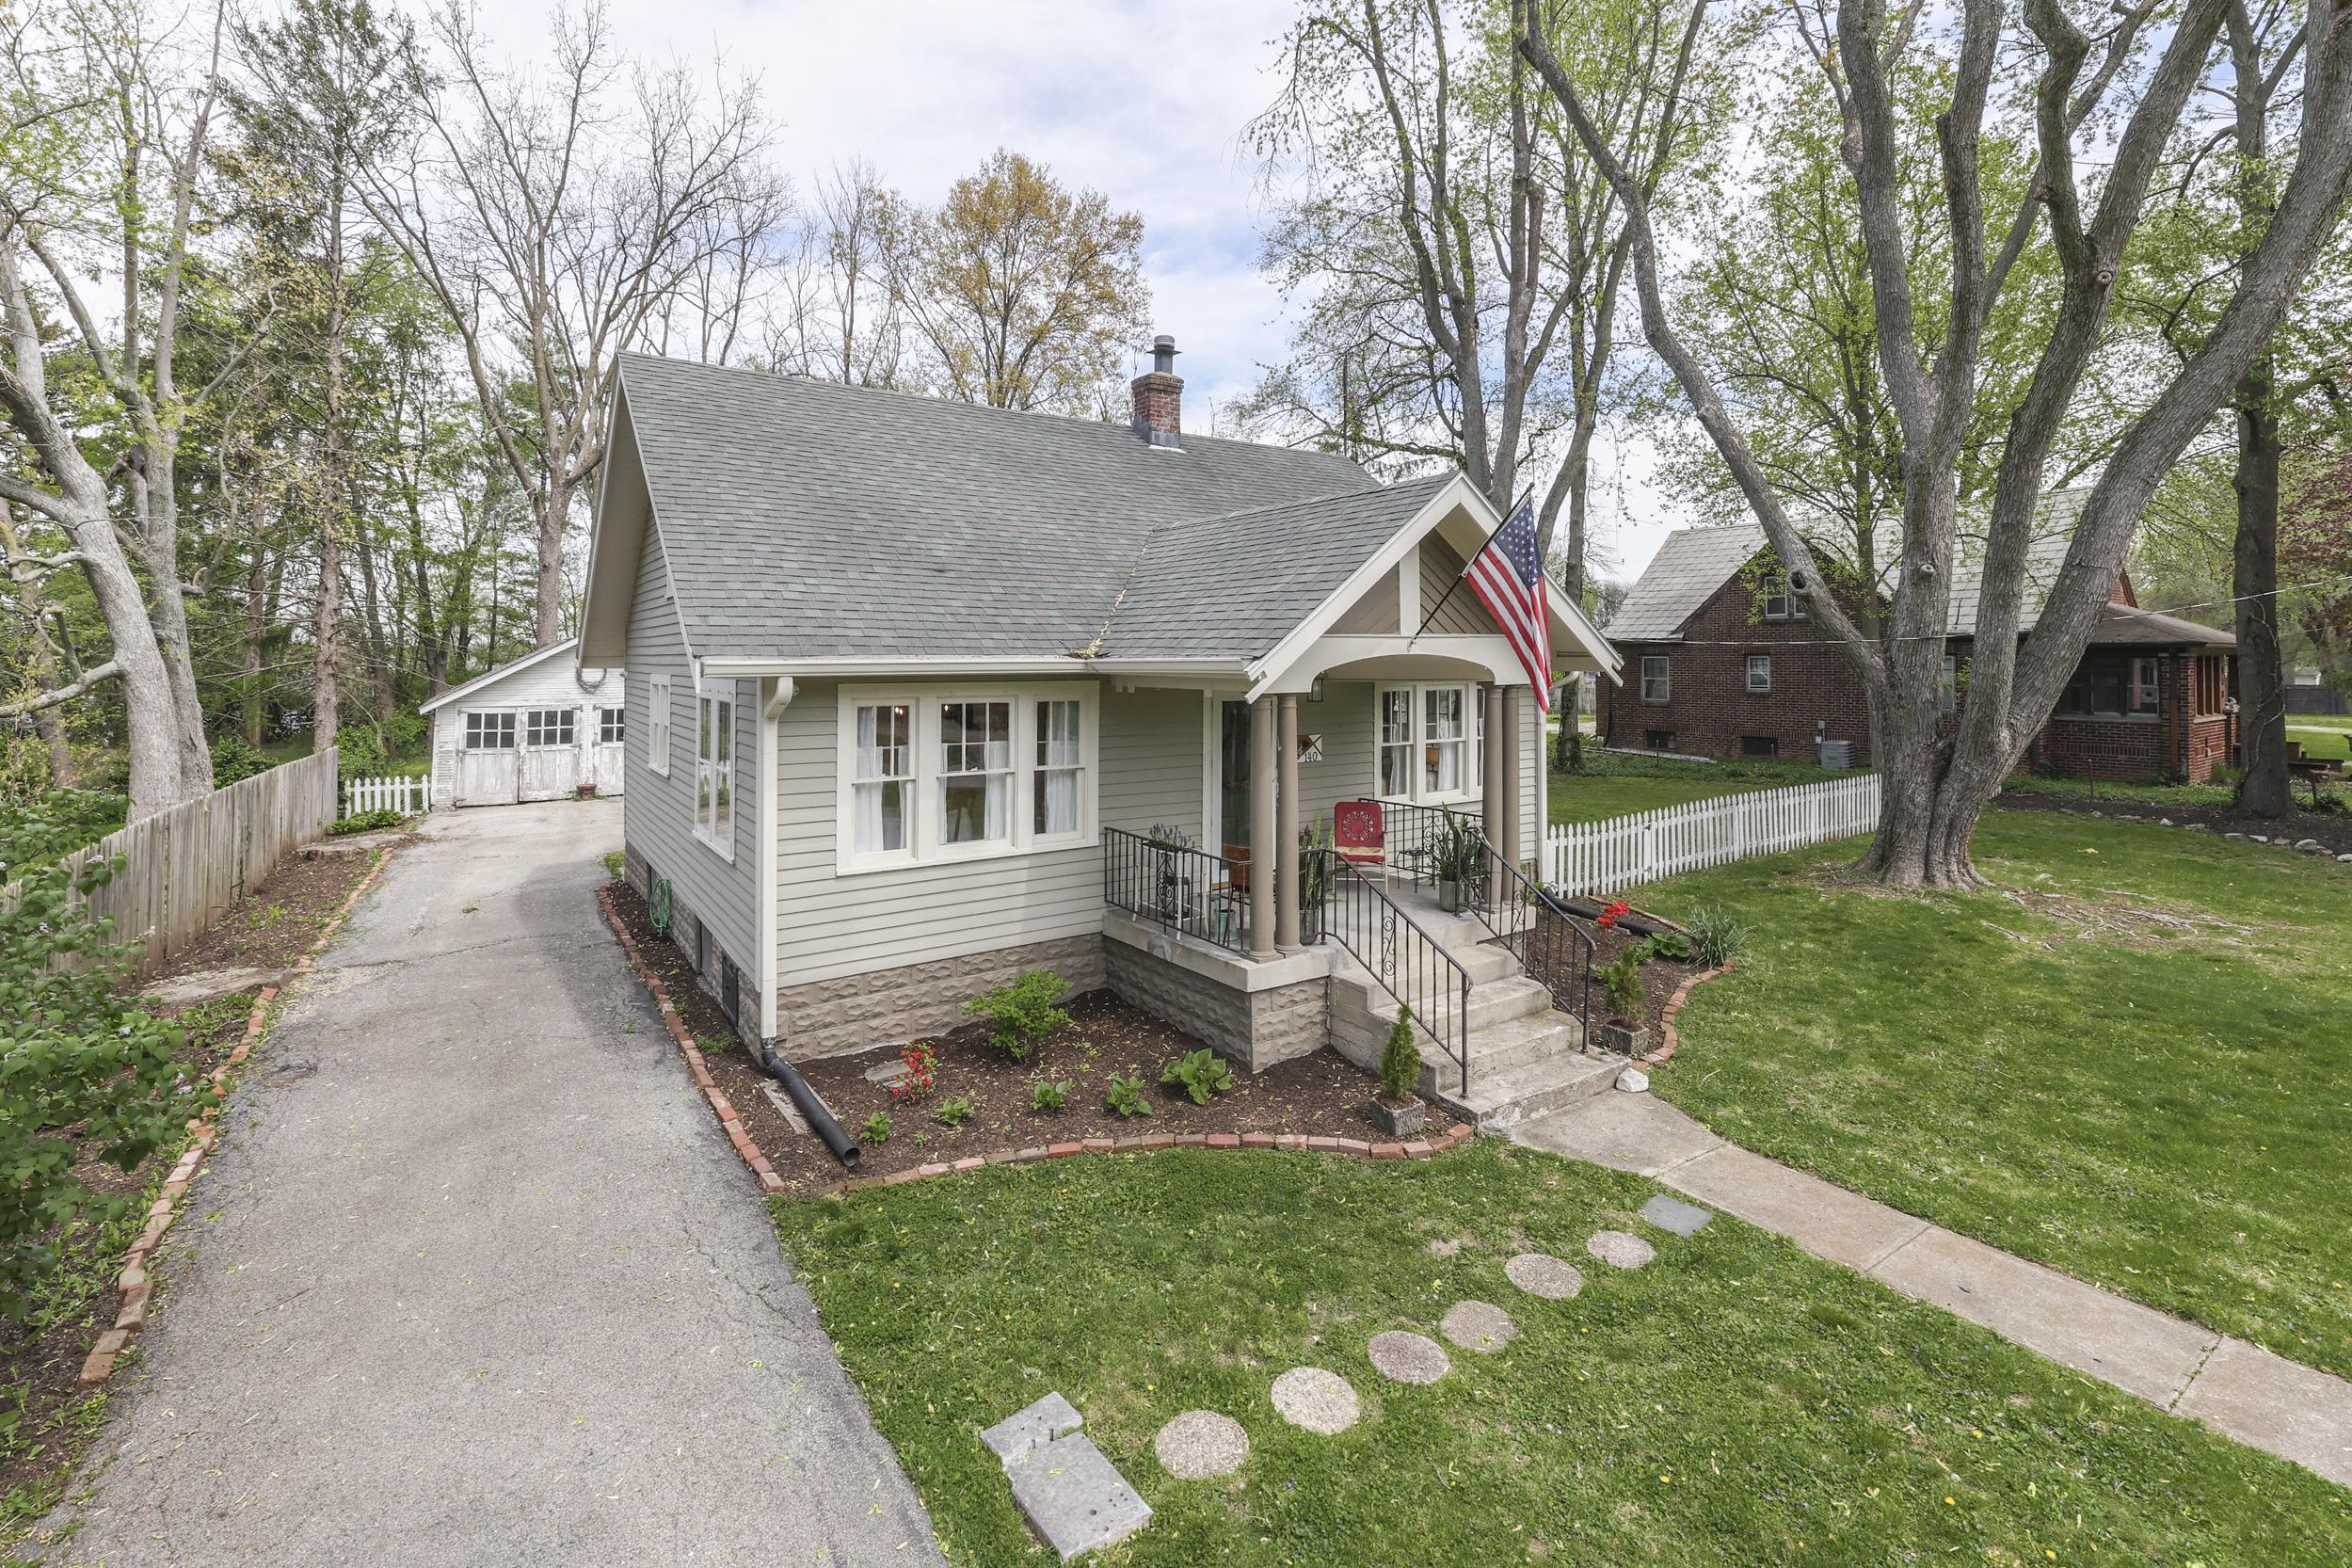 Photo one of 140 E Elbert St Indianapolis IN 46227 | MLS 21974960